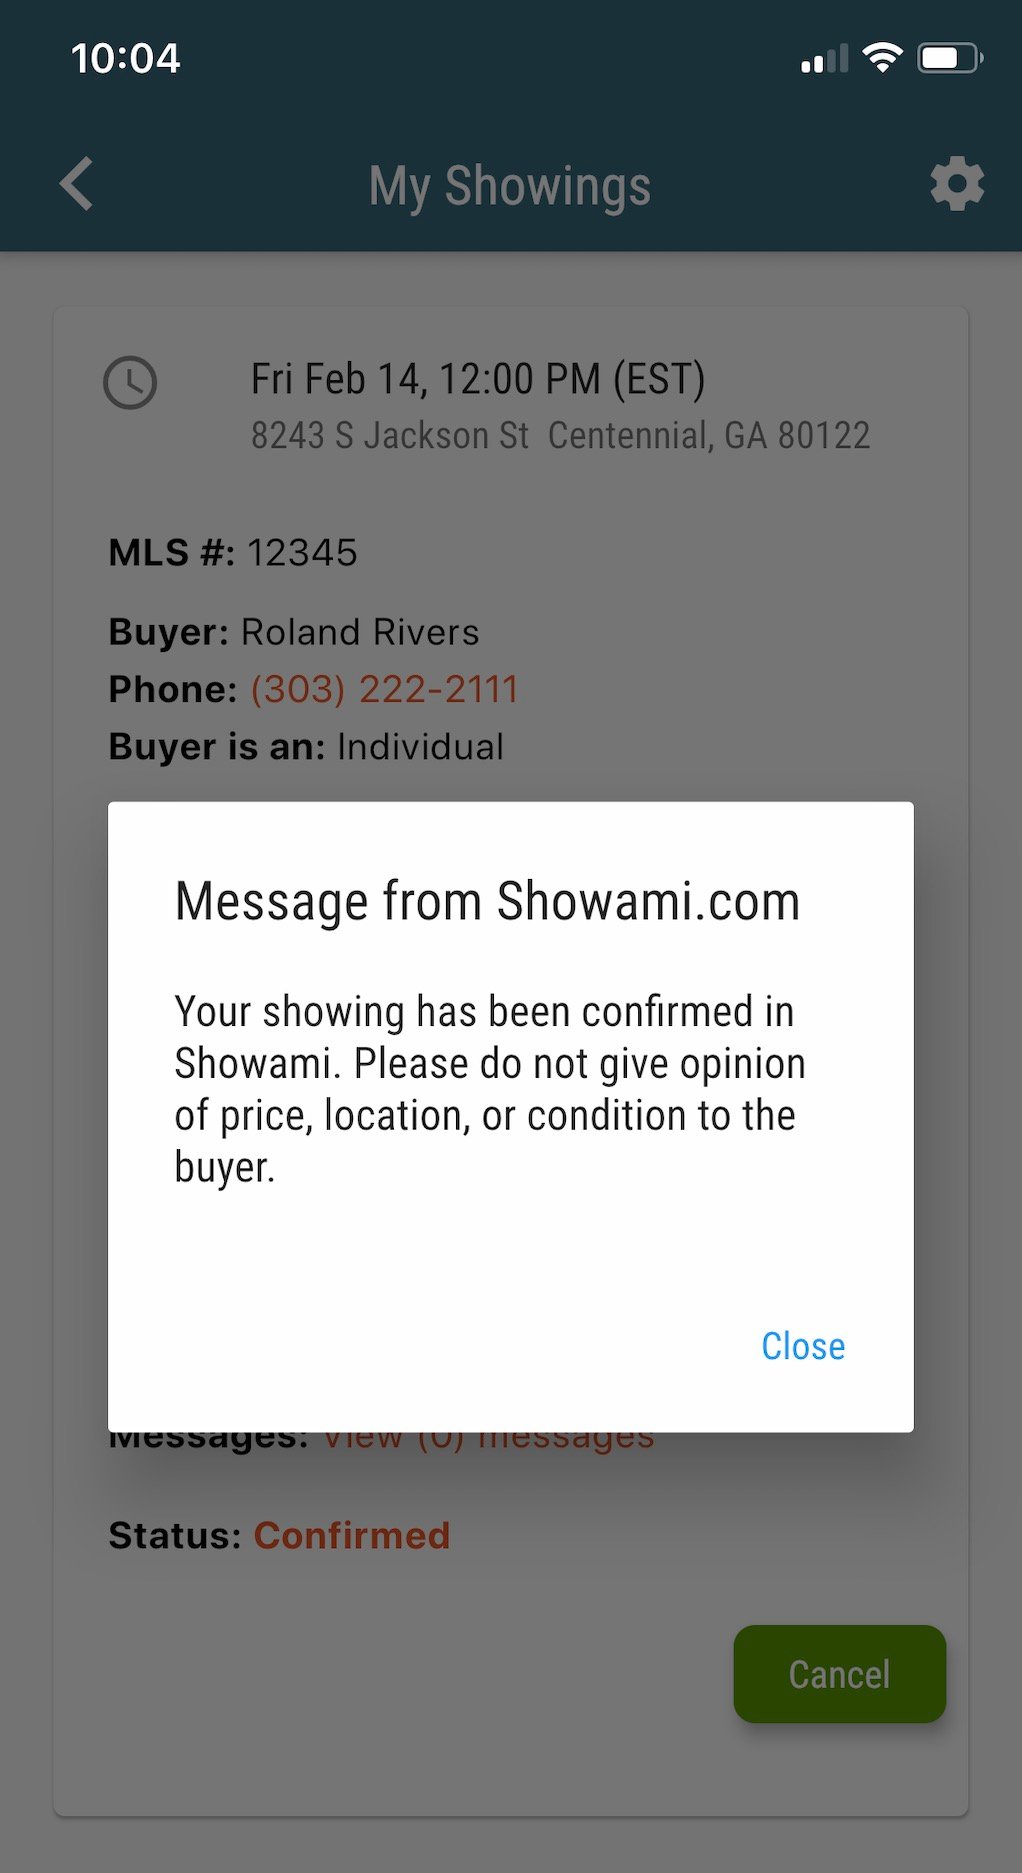 Showami showing confirmed in app message